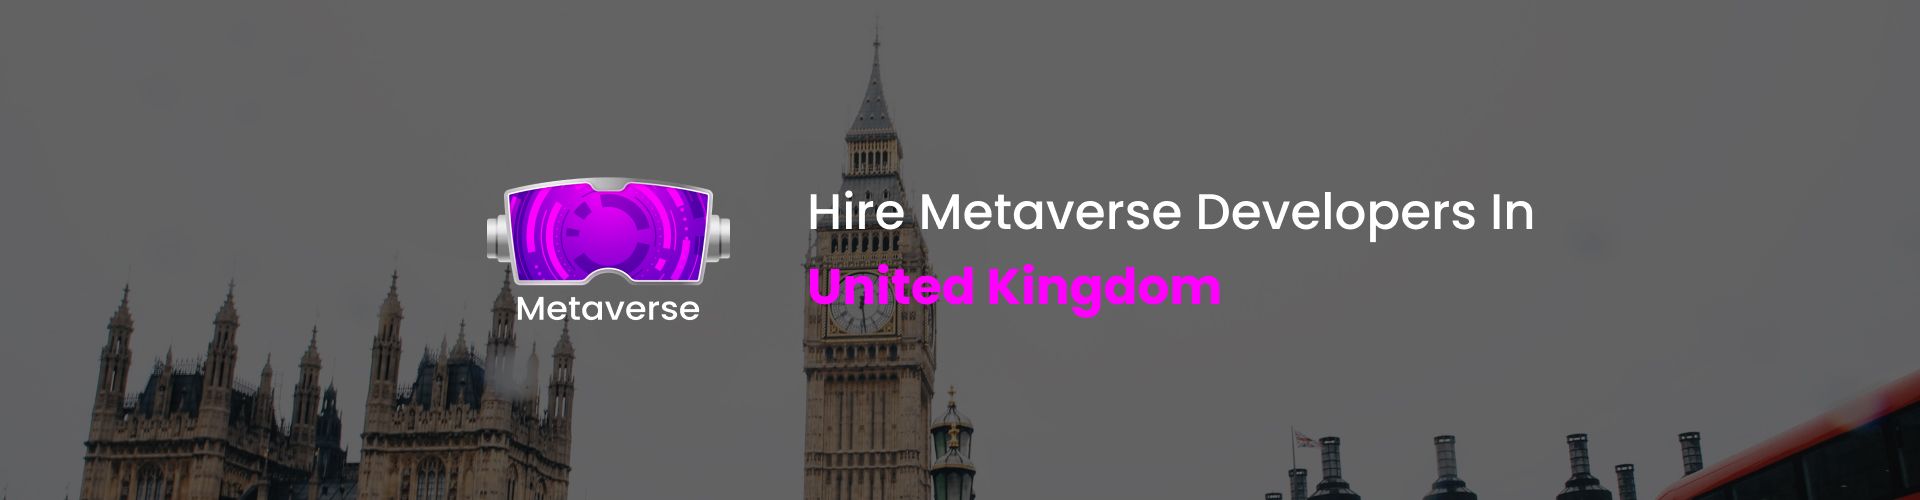 hire metaverse developers in united kingdom